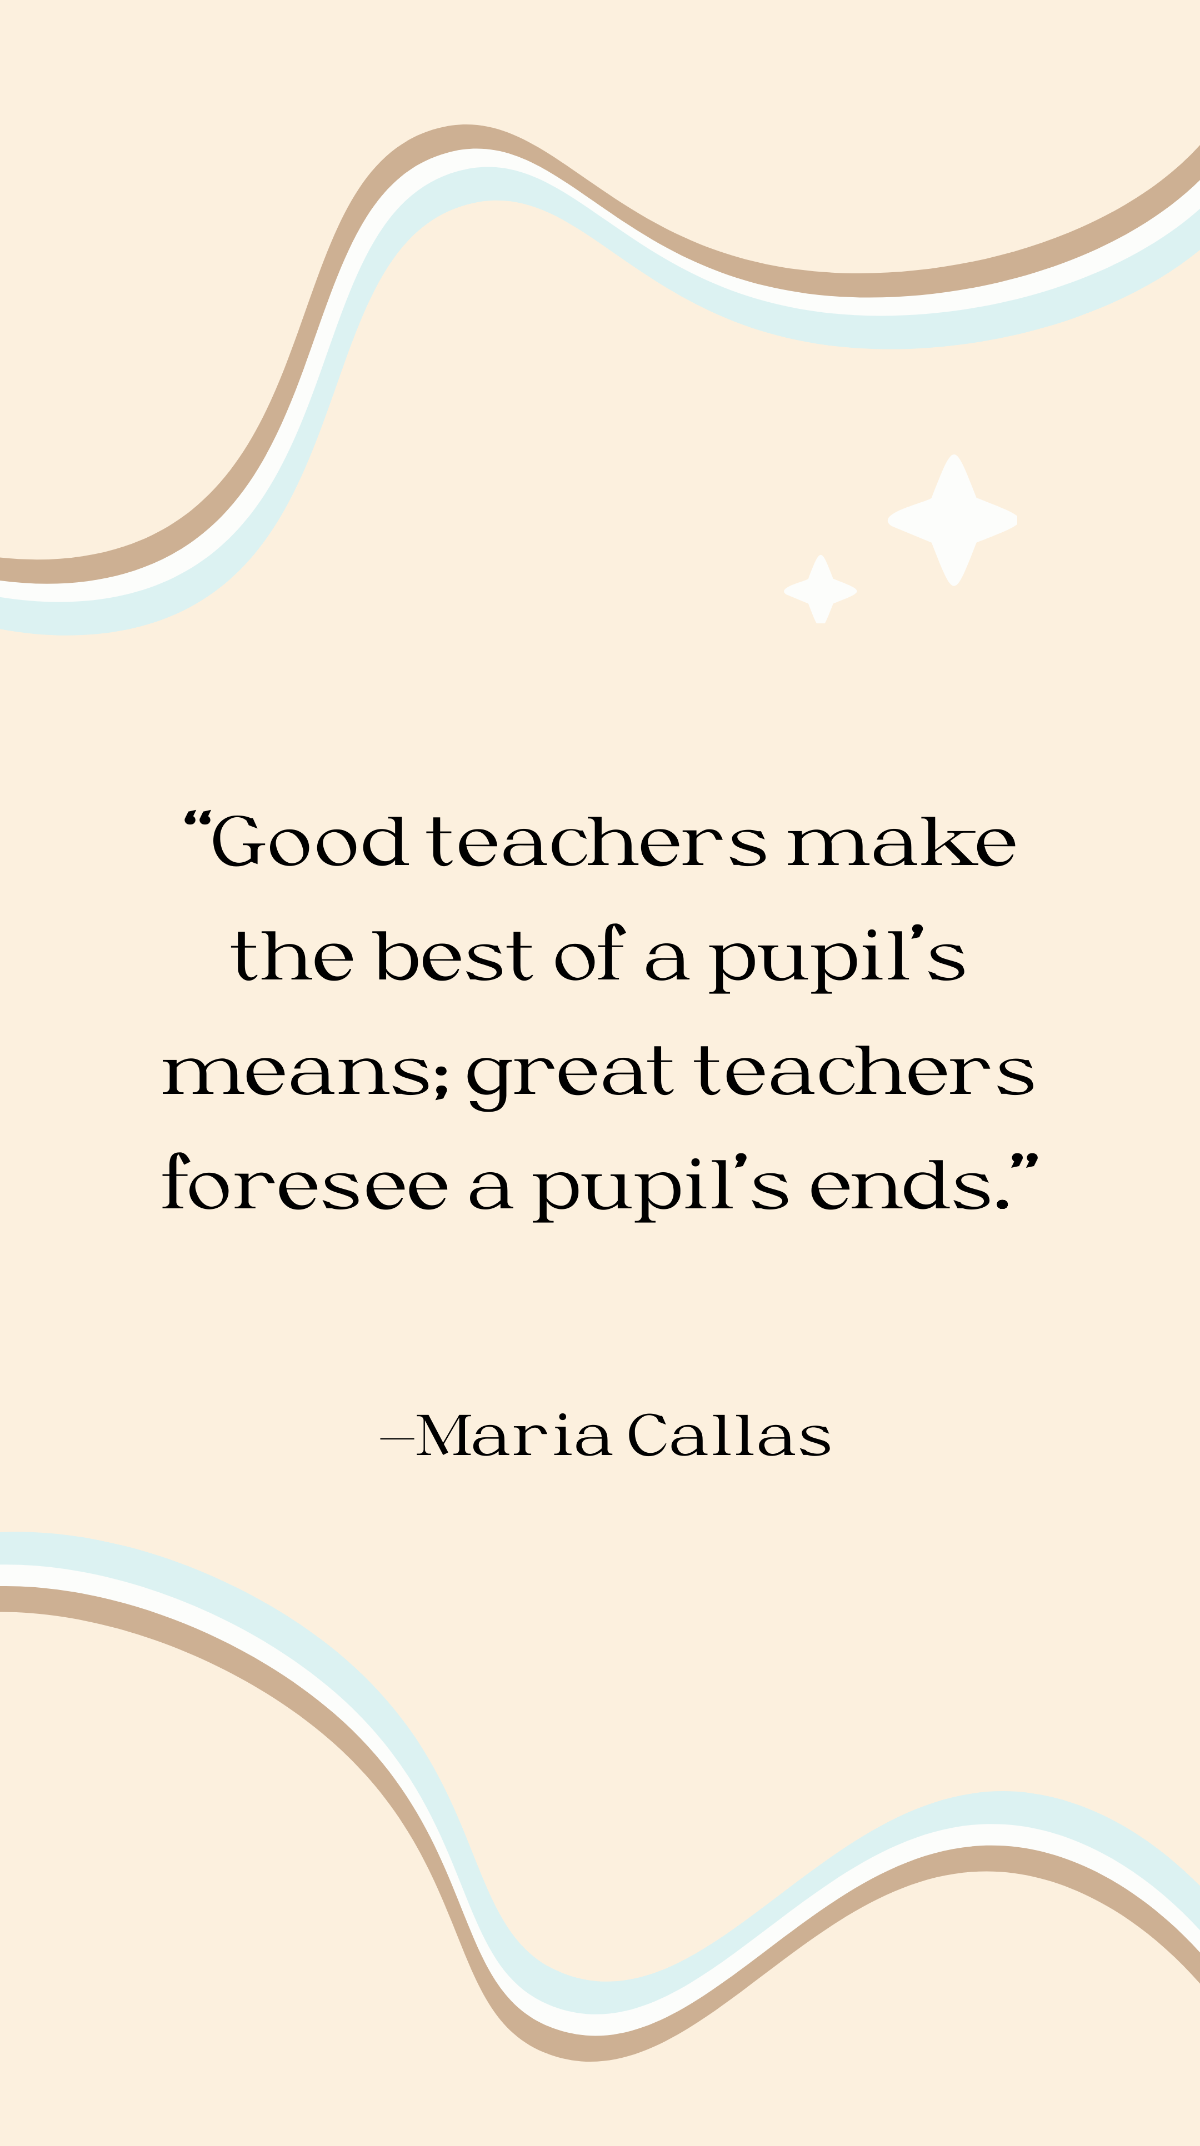 Free Maria Callas - Good teachers make the best of a pupil’s means; great teachers foresee a pupil’s ends. Template